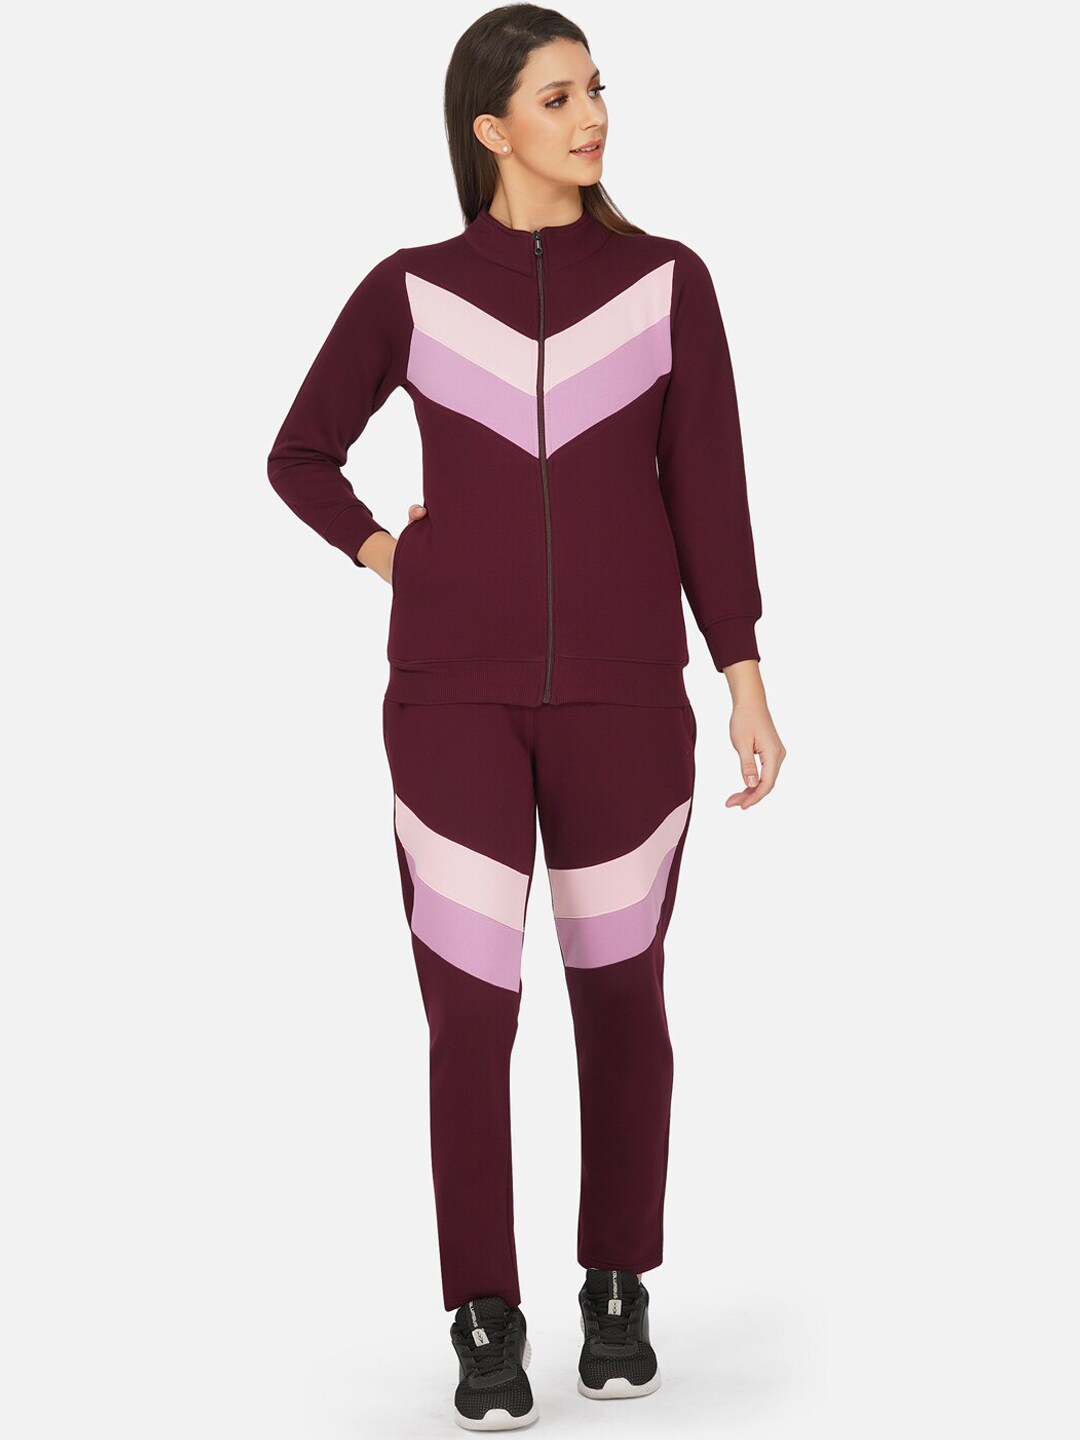 FABNEST Women Burgundy & Pink Solid Track Suit Price in India